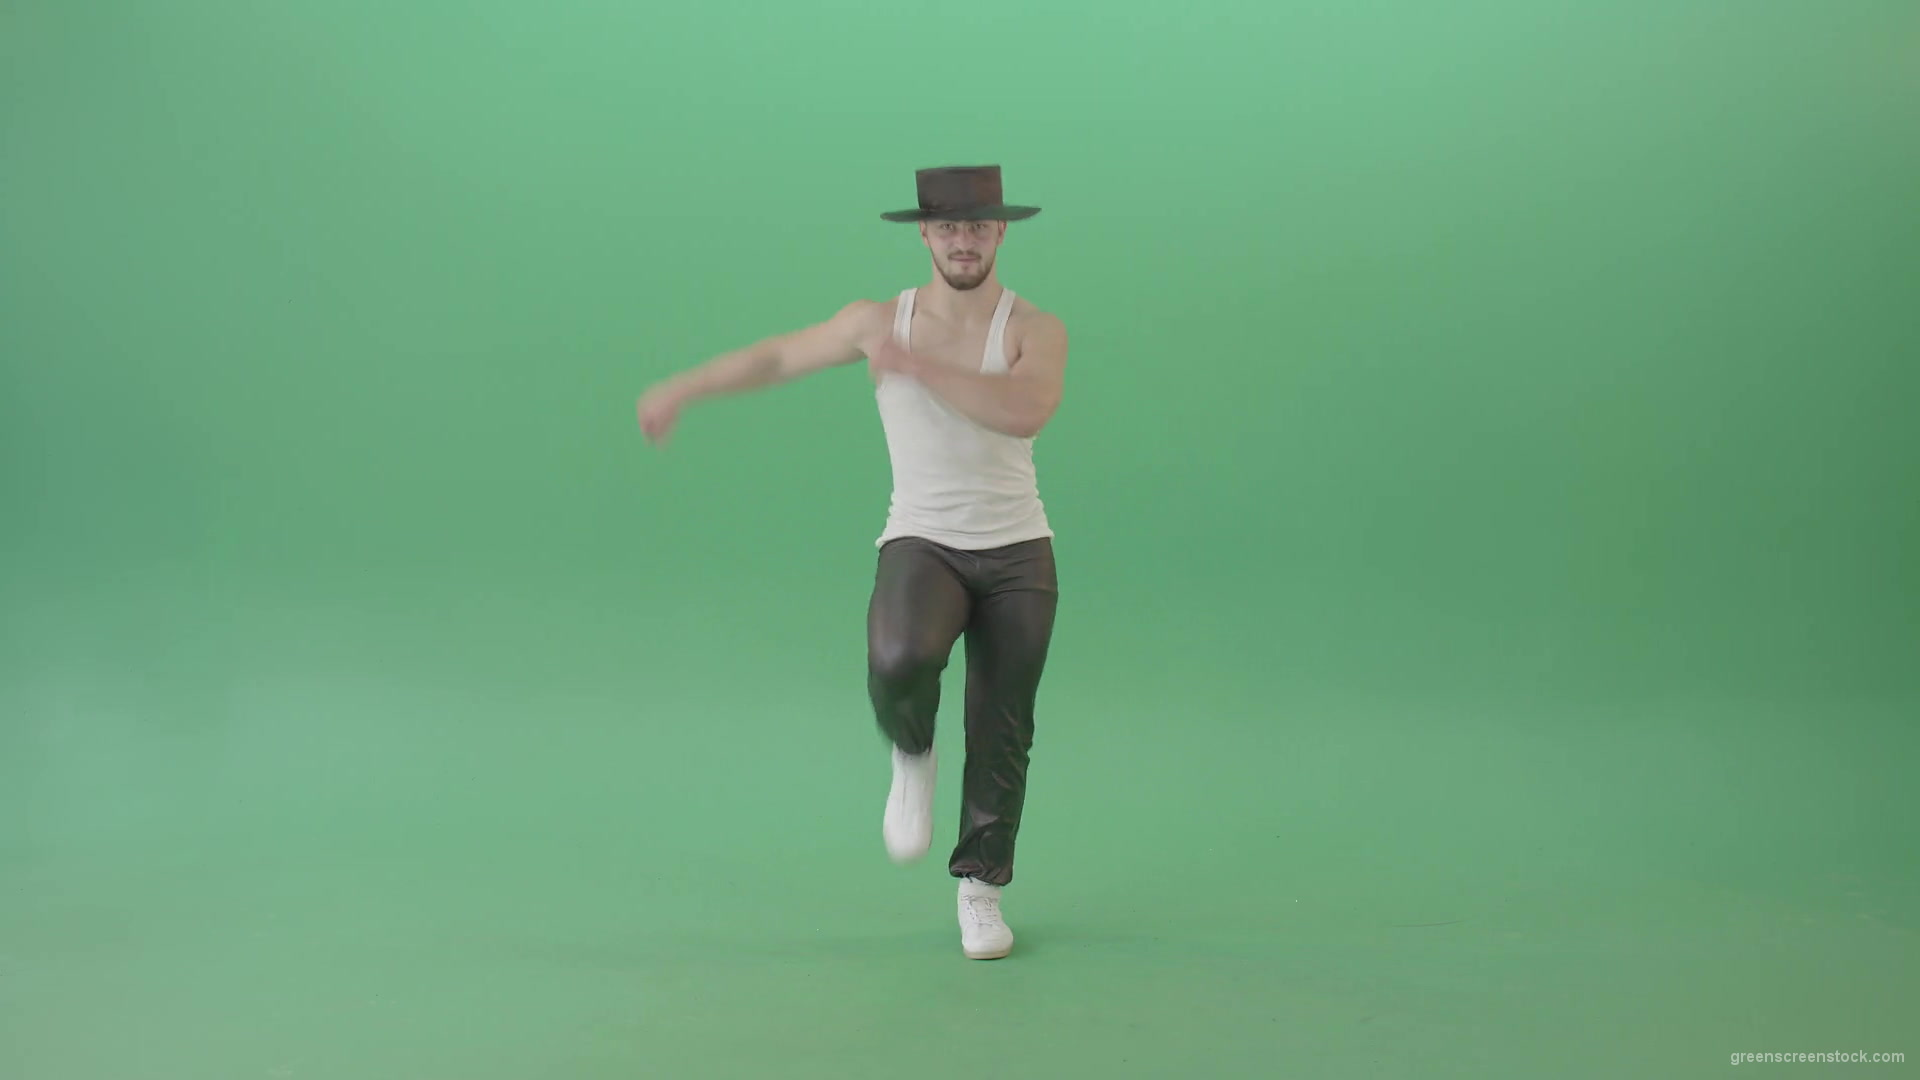 Funny-Man-marching-in-beat-isolated-on-Green-Screen-Chroma-Key-4K-Video-Footage-1920_004 Green Screen Stock